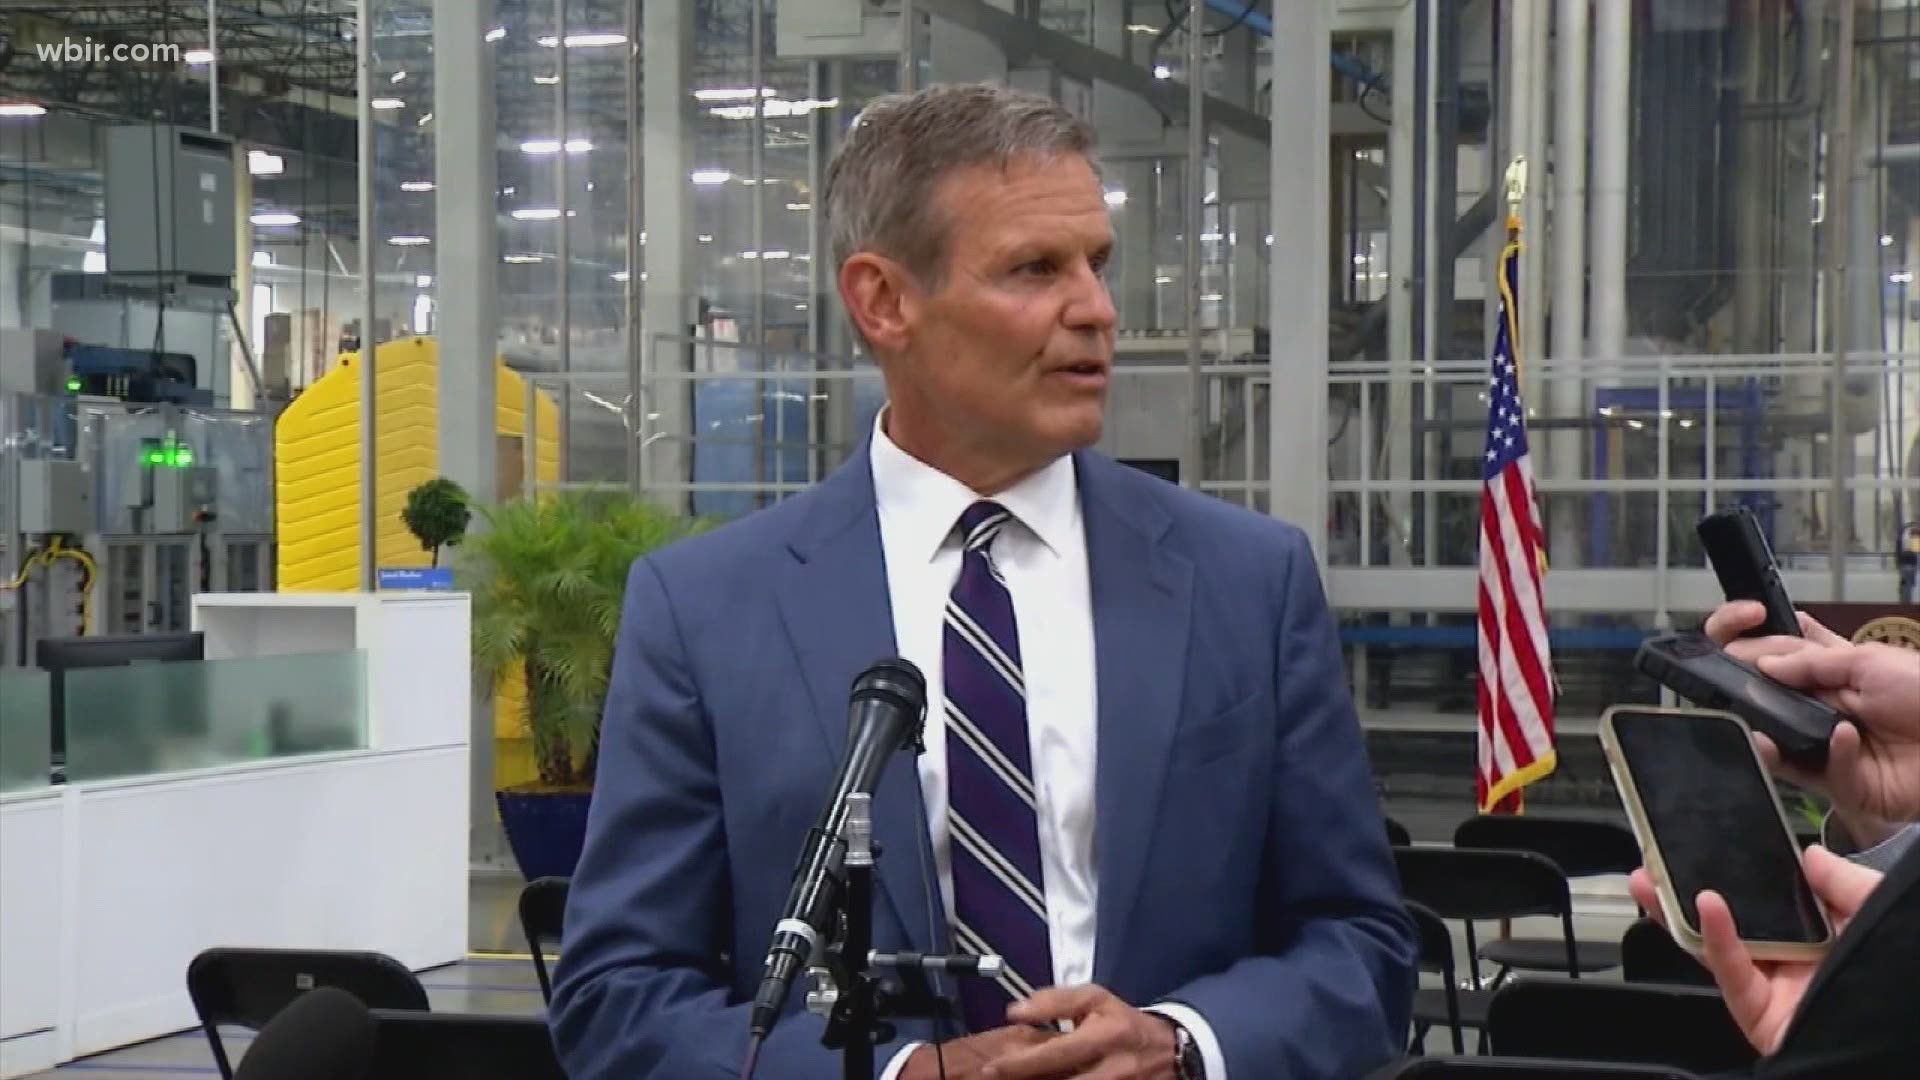 Governor Bill Lee stood by his statements during a press conference on June 3